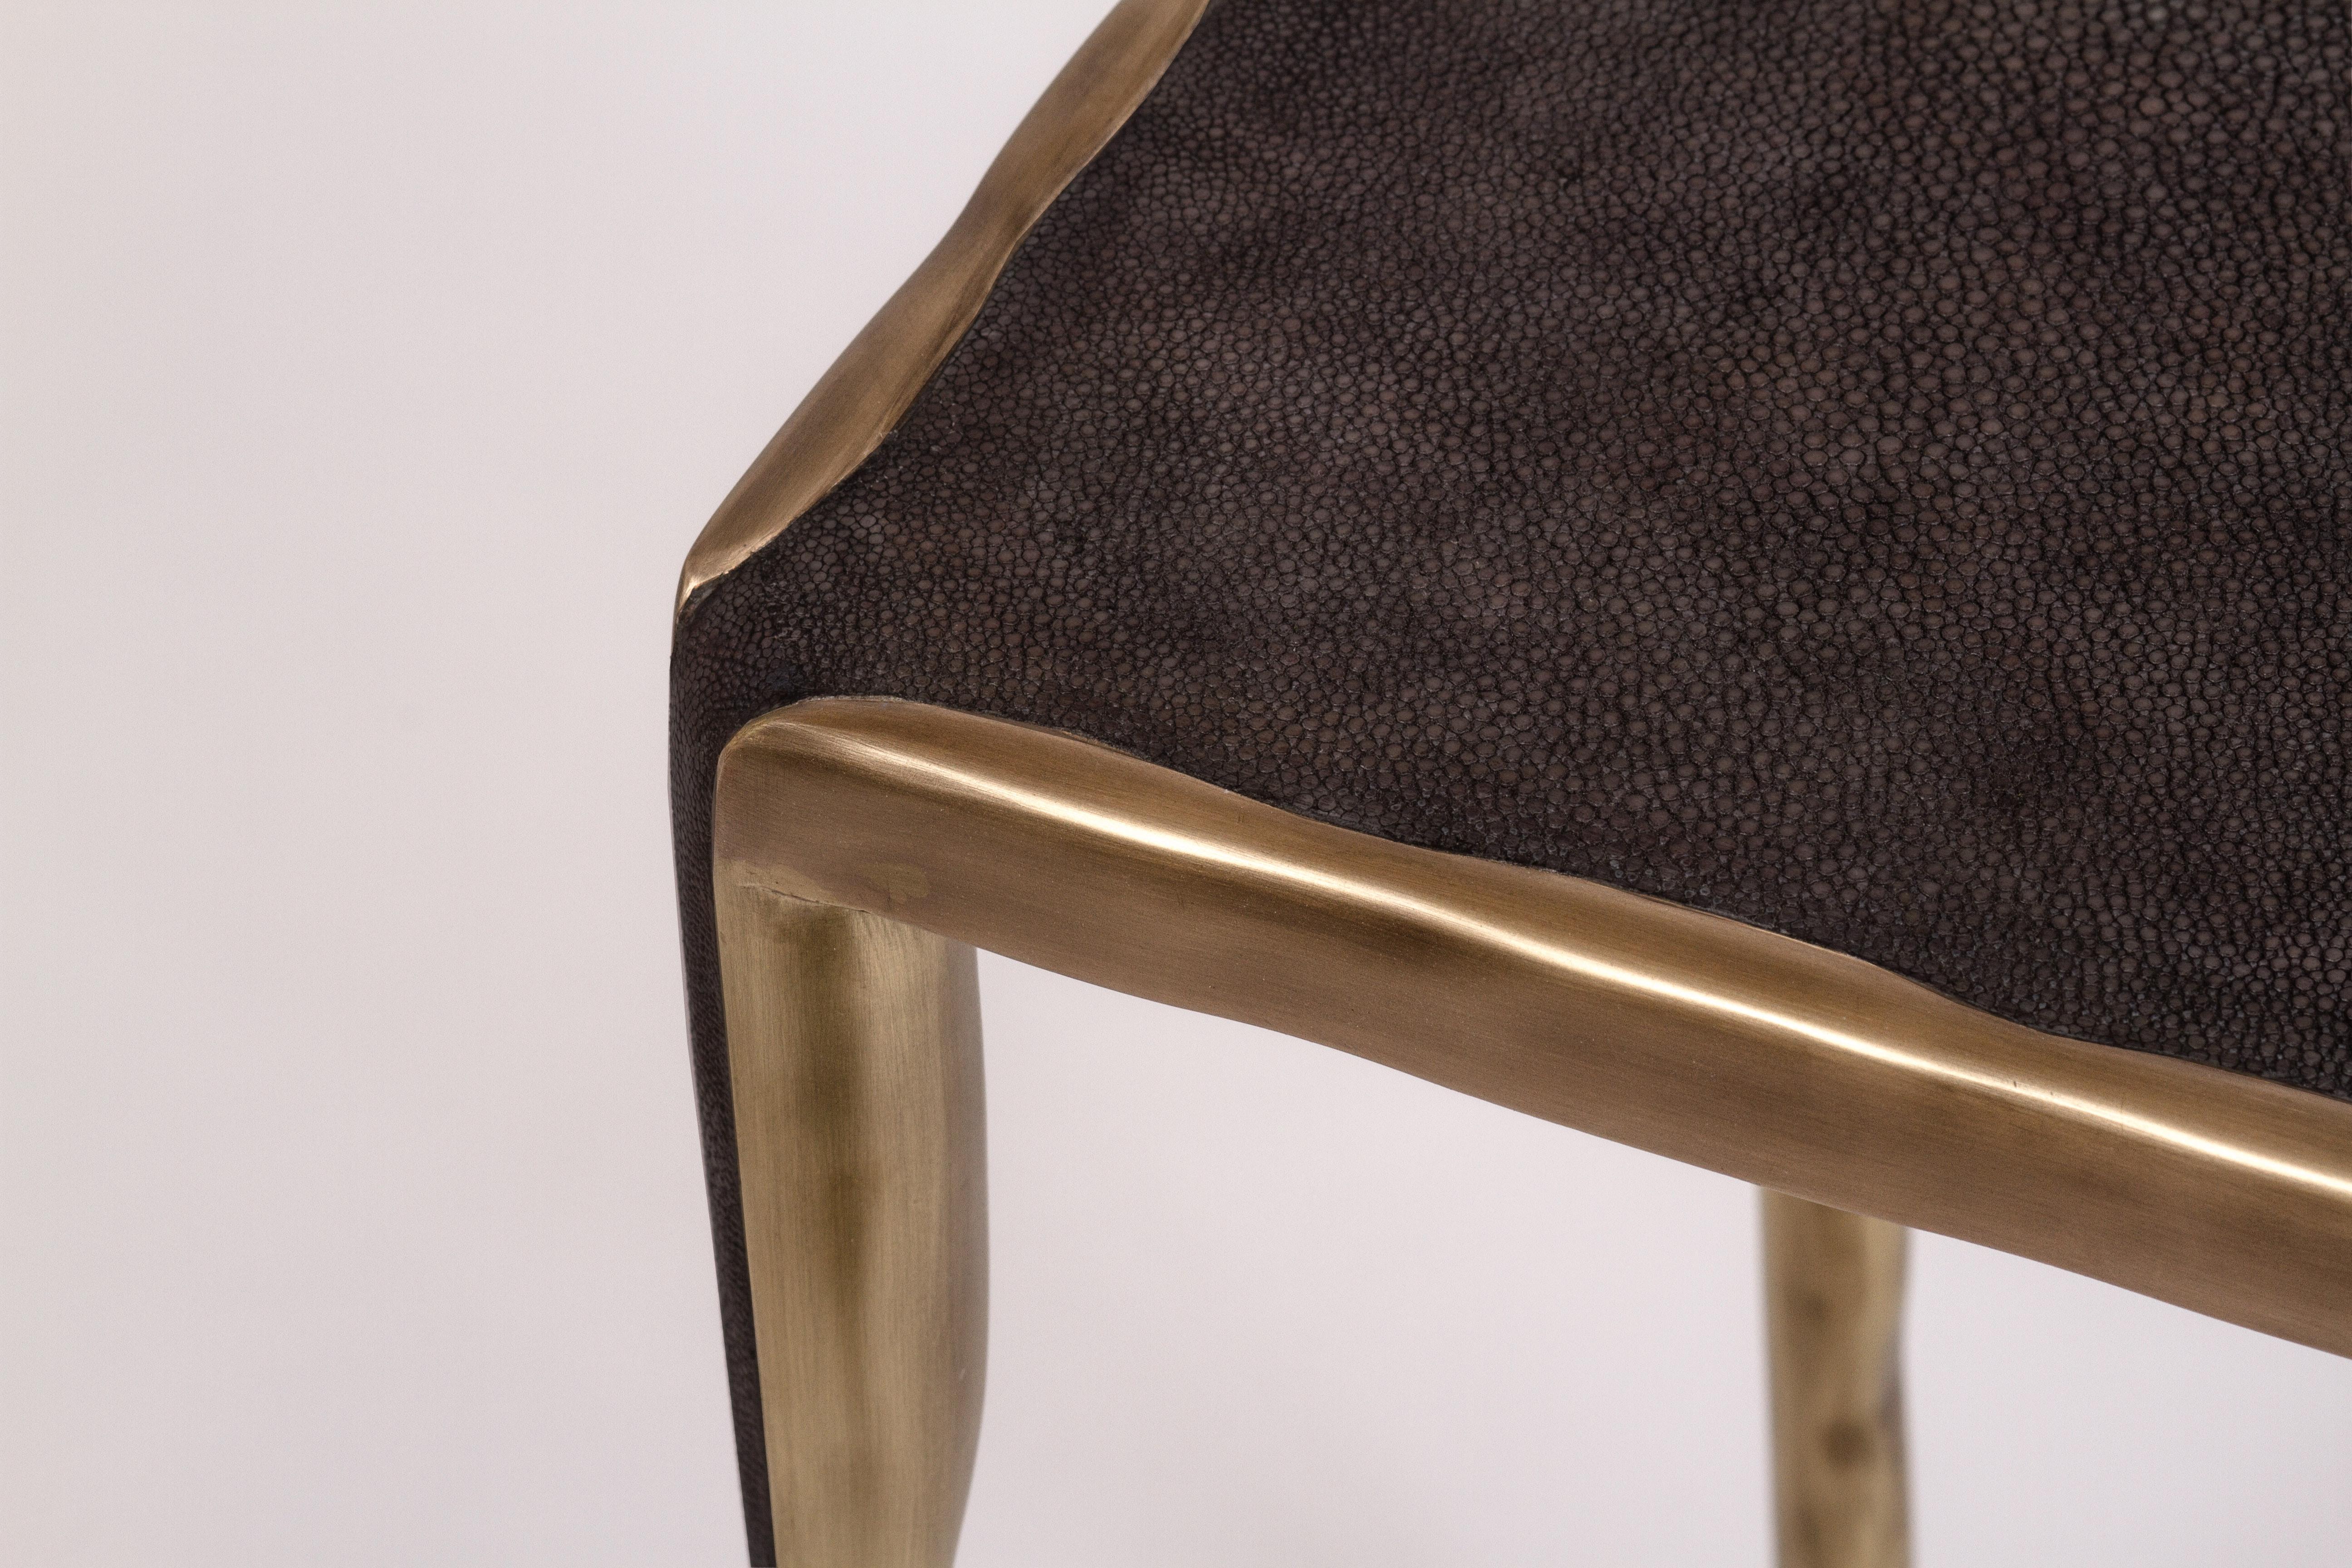 The melting nesting side table in medium is part of a series of nesting side tables (sold separately). One can purchase the tables on their own or buy them as a set to create elegant & geometric shapes. This piece is inlaid in coal black shagreen